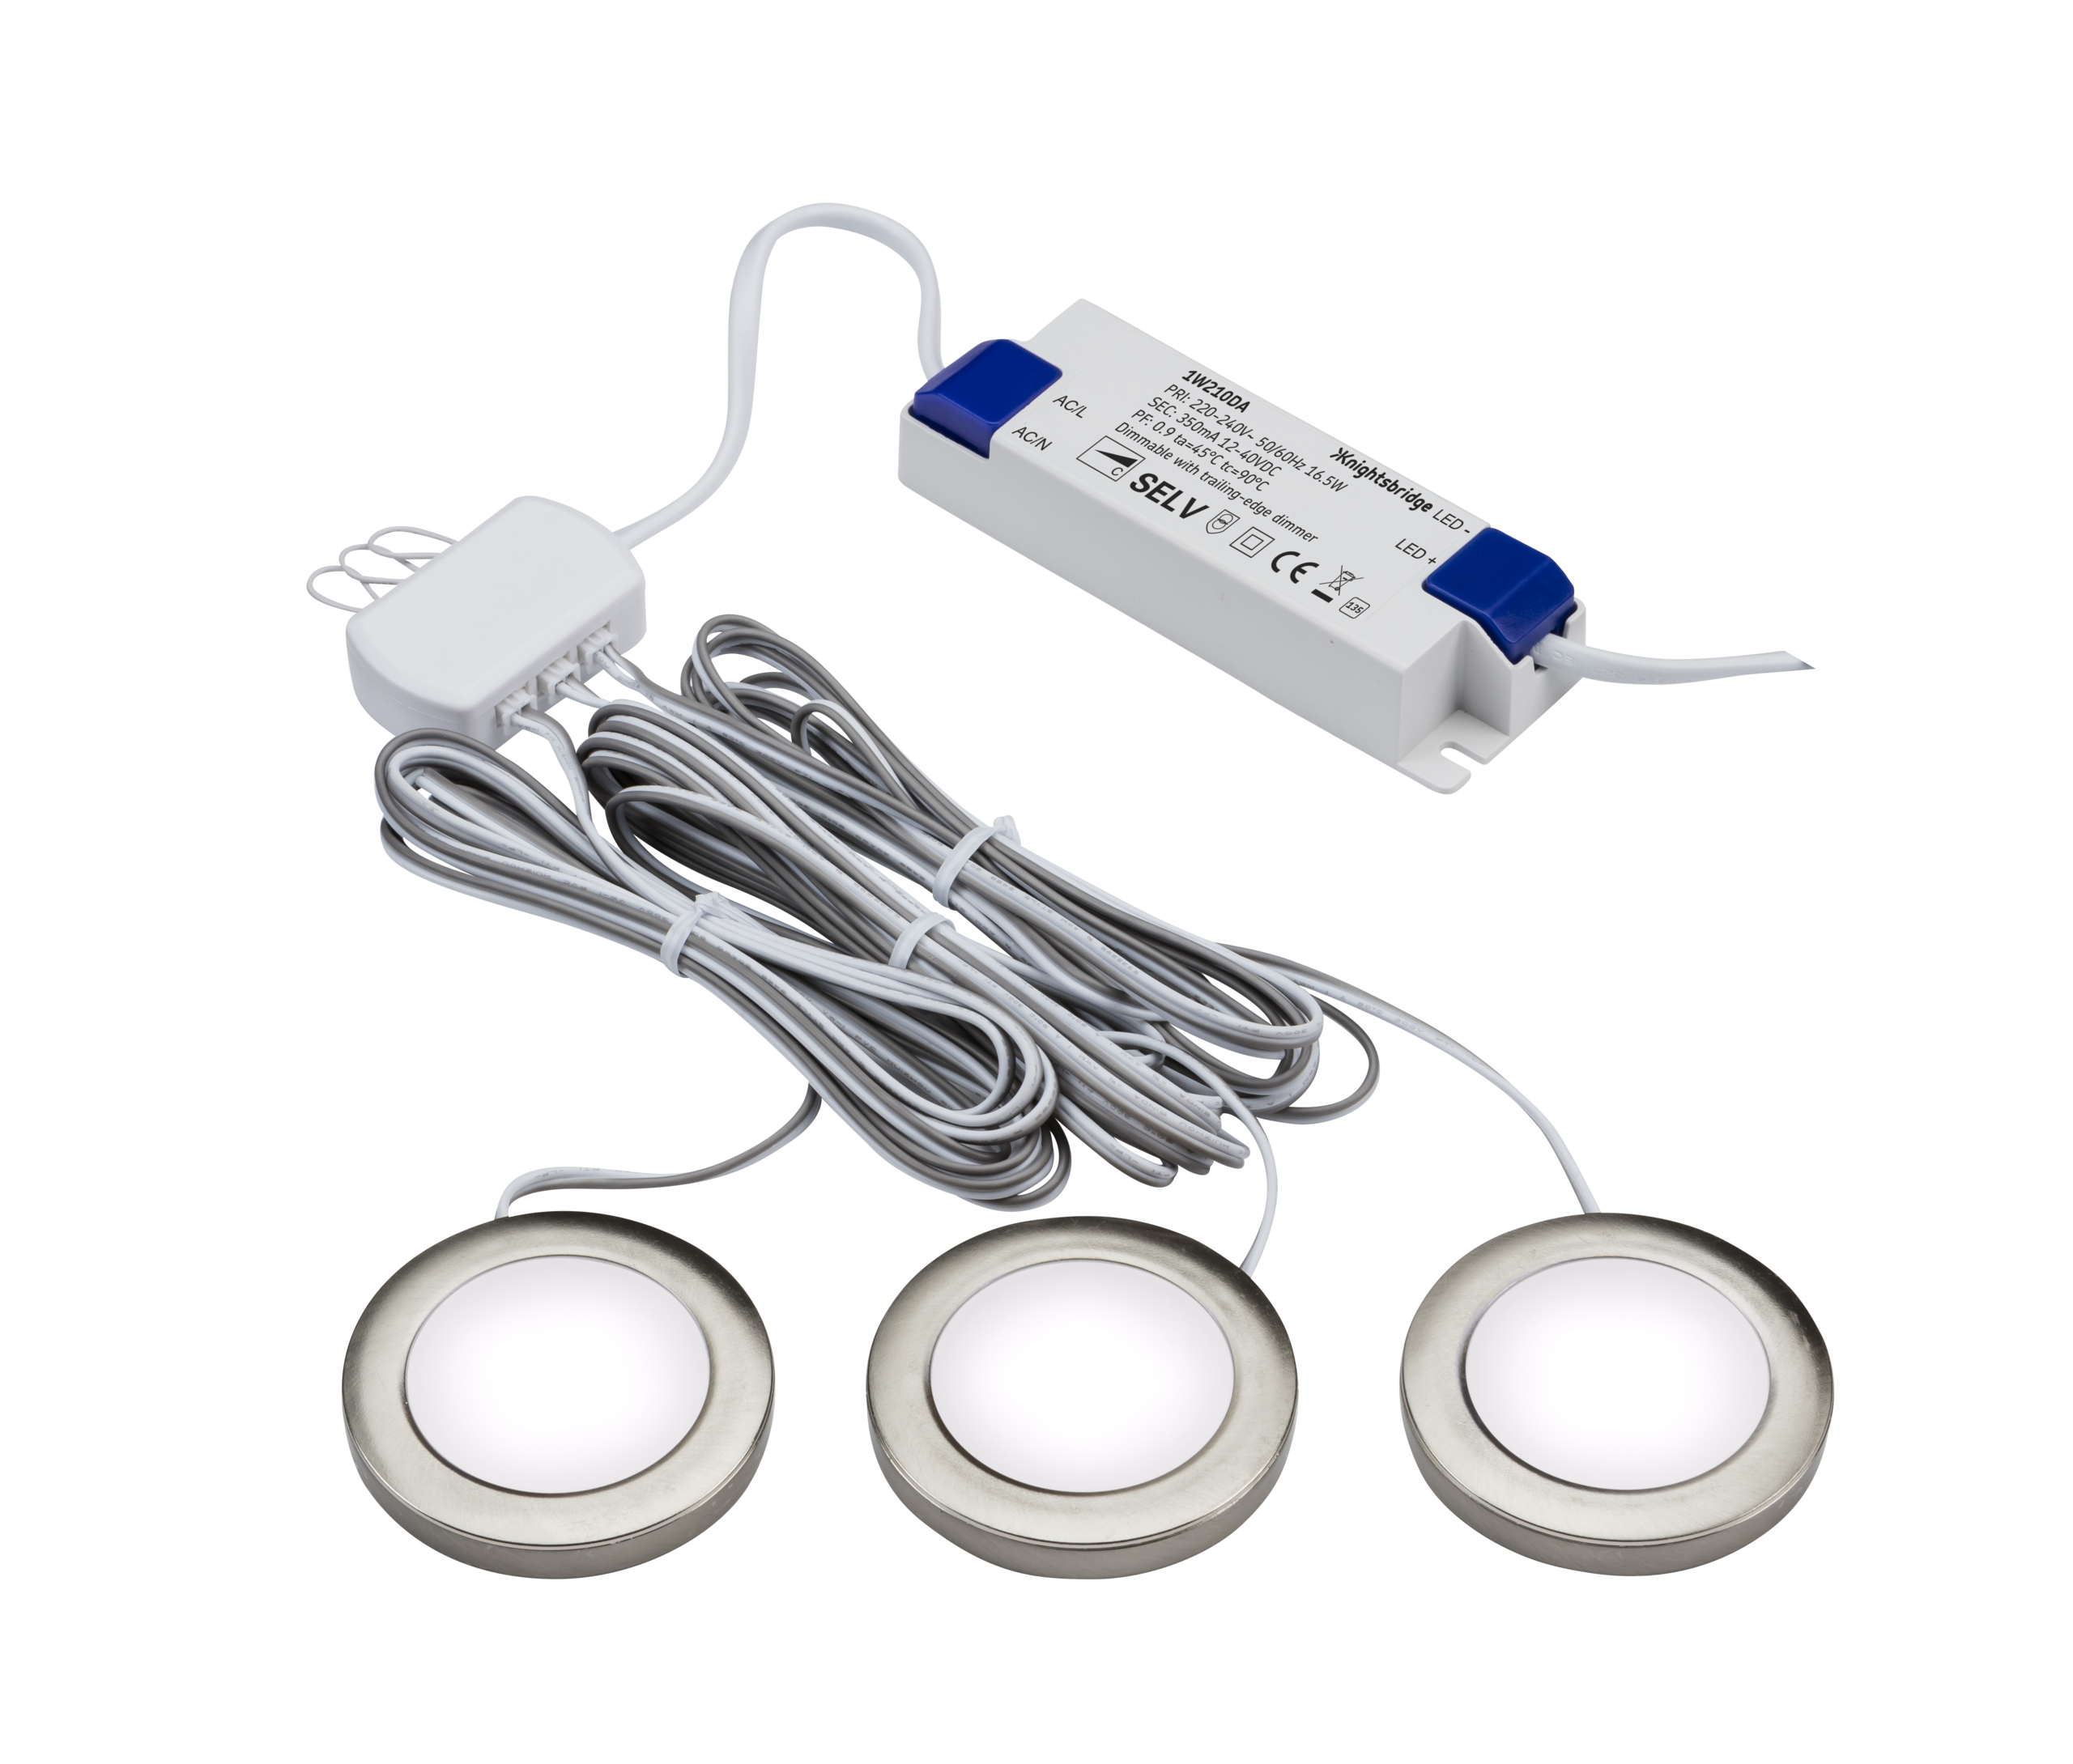 ML Accessories-UNDKIT3BCCW 230V IP20 2.5W LED Dimmable Under Cabinet Lights in Brushed Chrome - Pack of 3  - 4000K